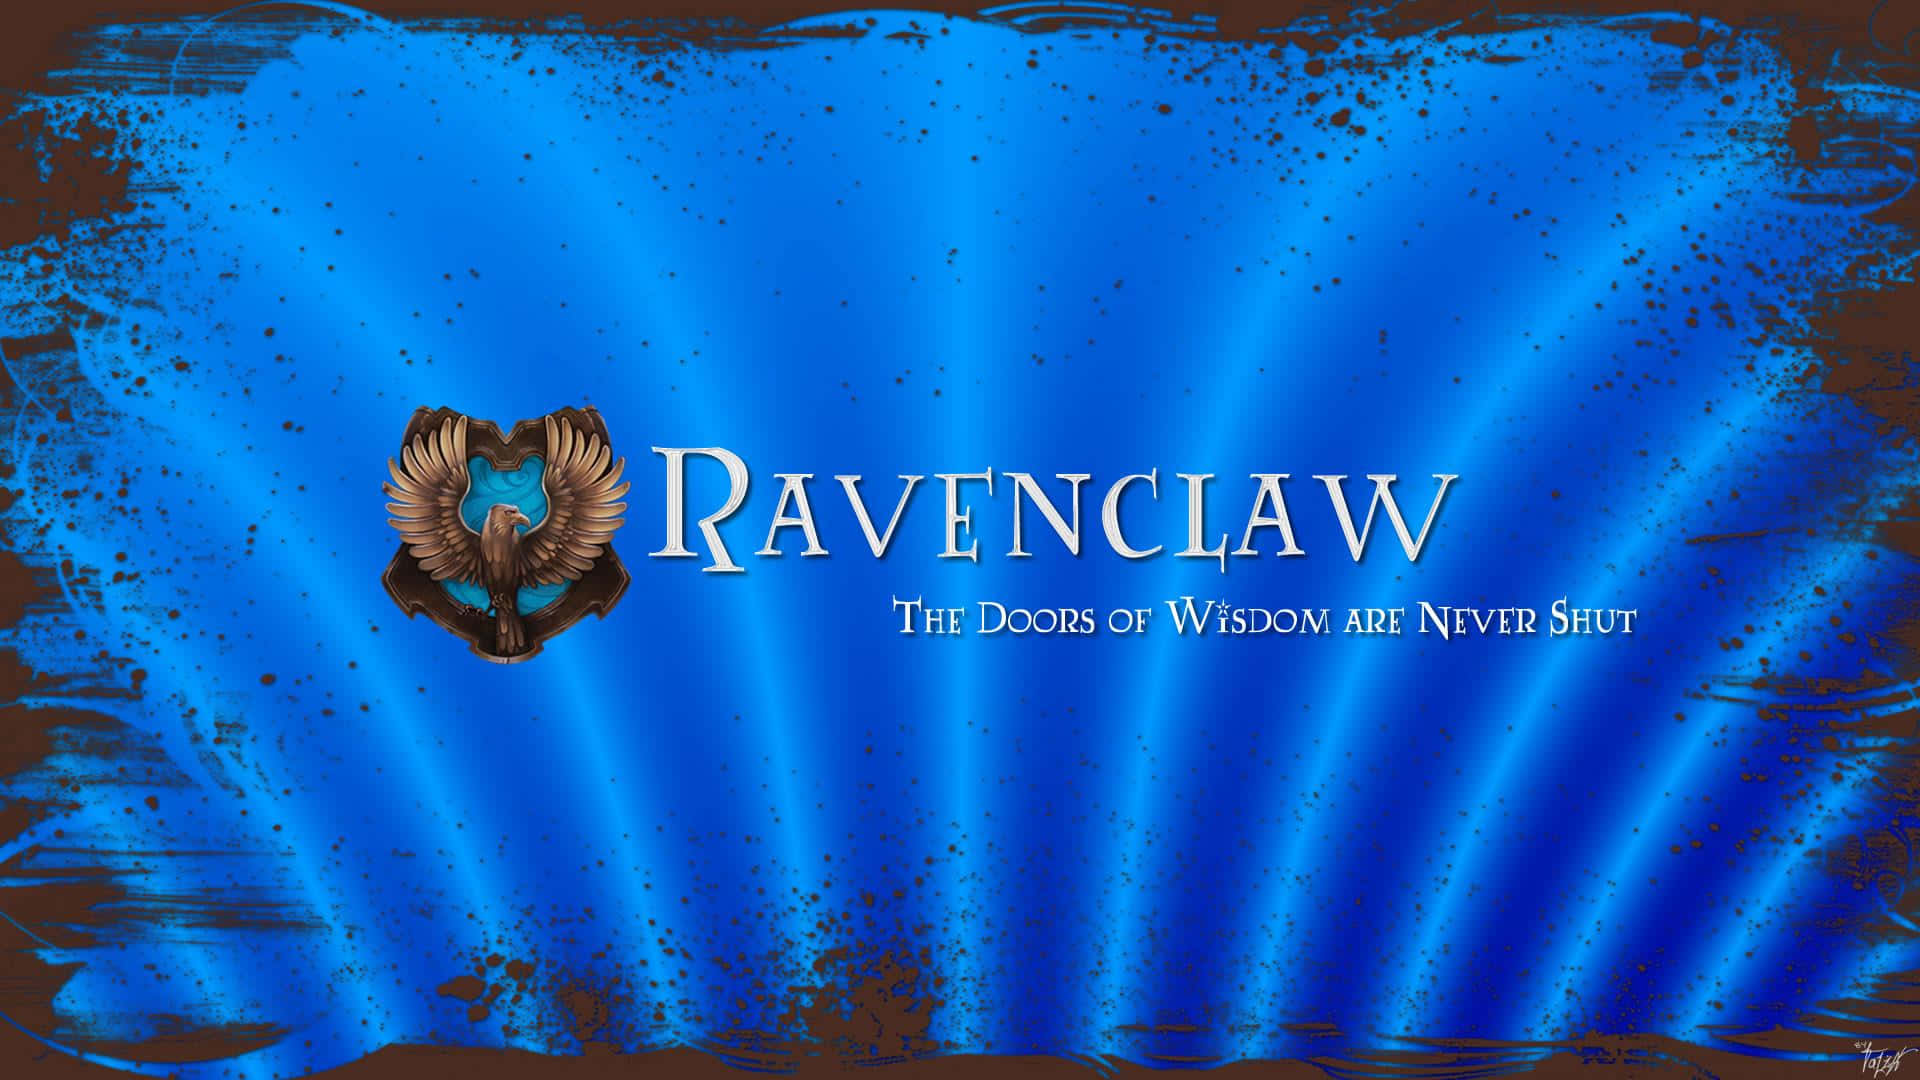 "Come Fly With Us - Join the Ravenclaw House" Wallpaper